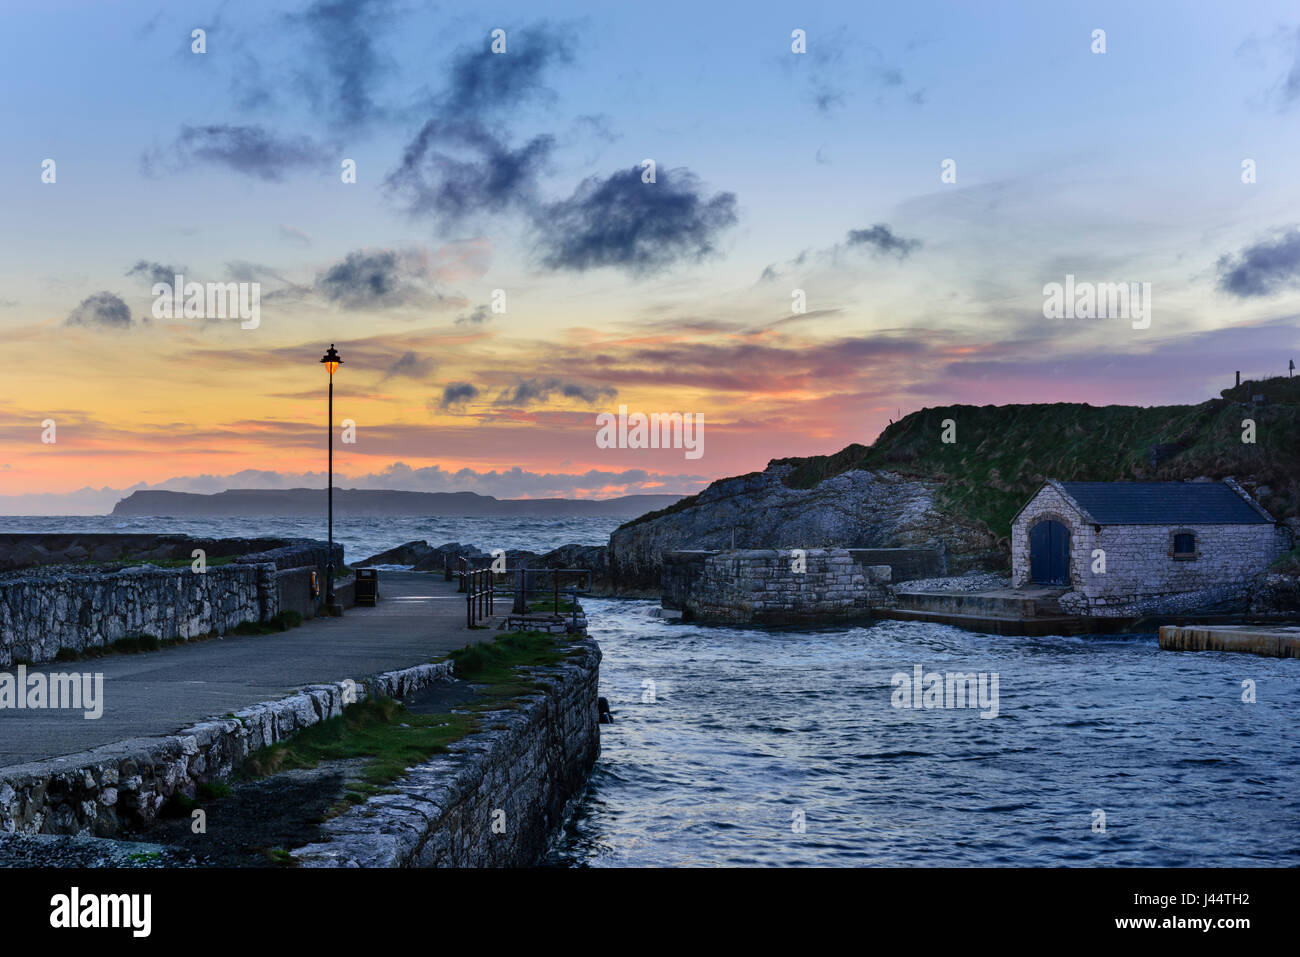 Ballintoy Harbour on the Causeway Coast of North Antrim between Bushmills and Ballycastle in Northern Ireland. Seen here at dawn. Stock Photo